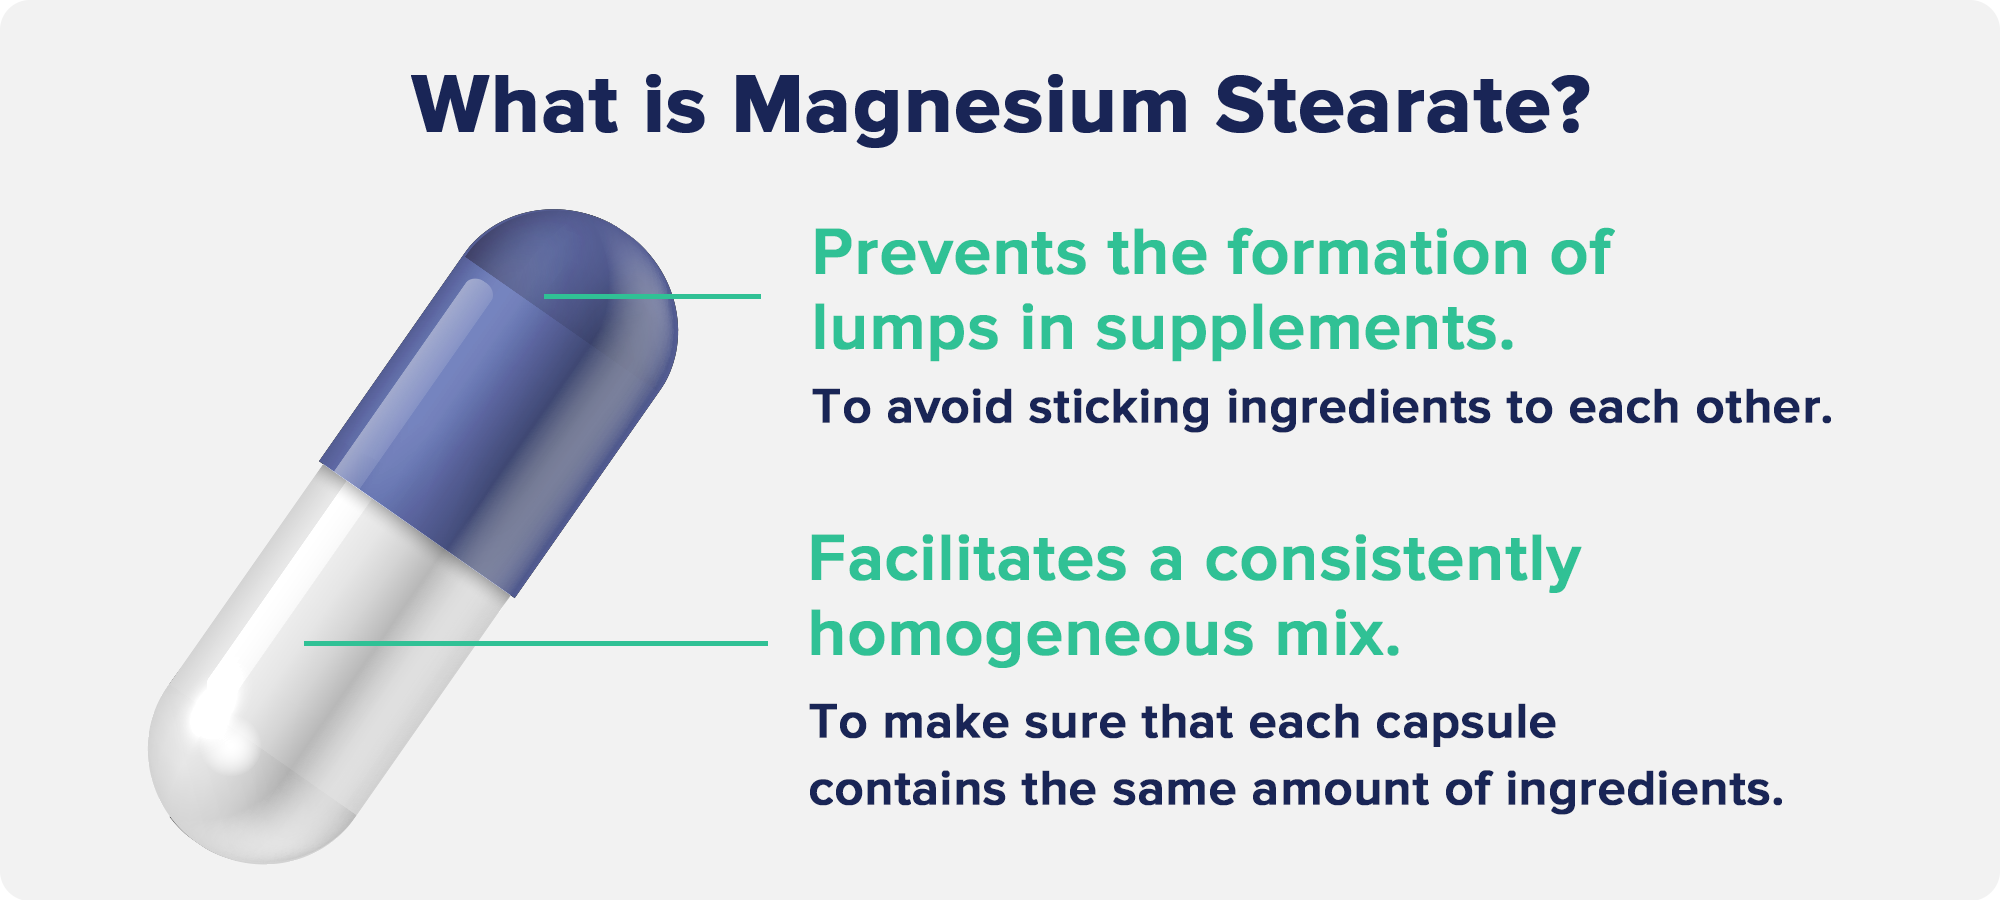 What is Magnesium Stearate?